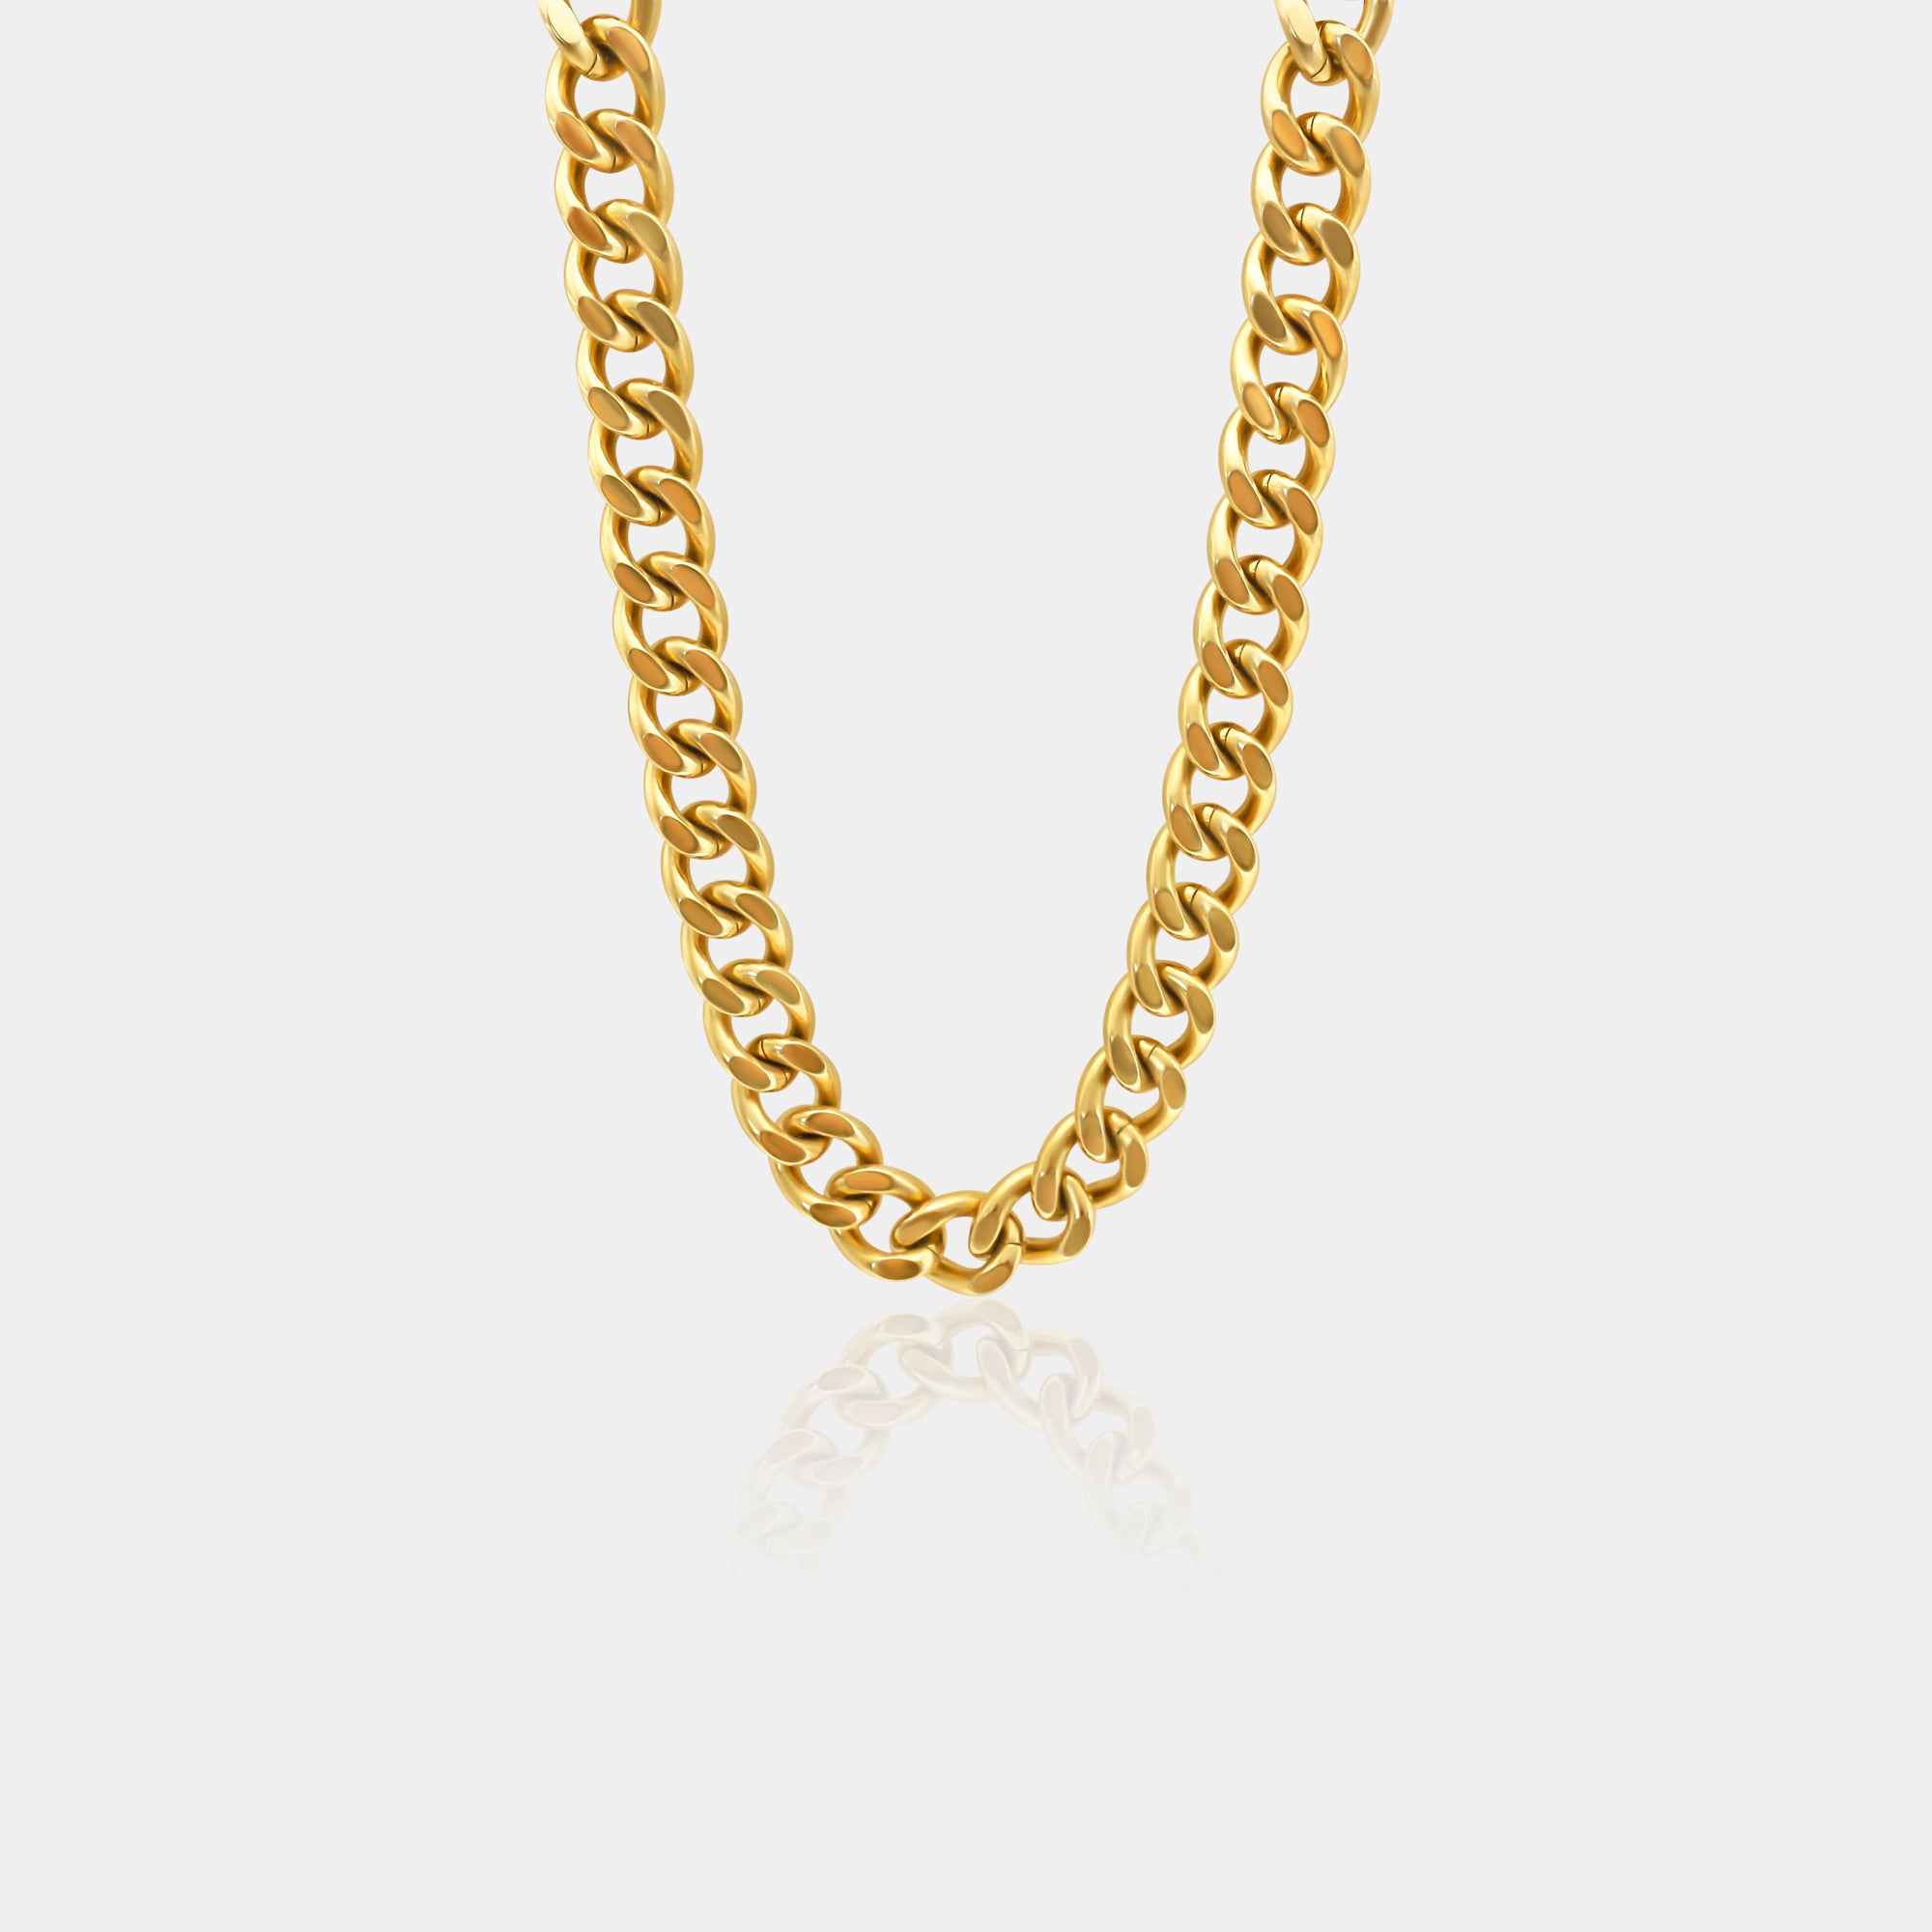 Celine lustrous grey pearl and gold chain necklace | The Jewelry Palette